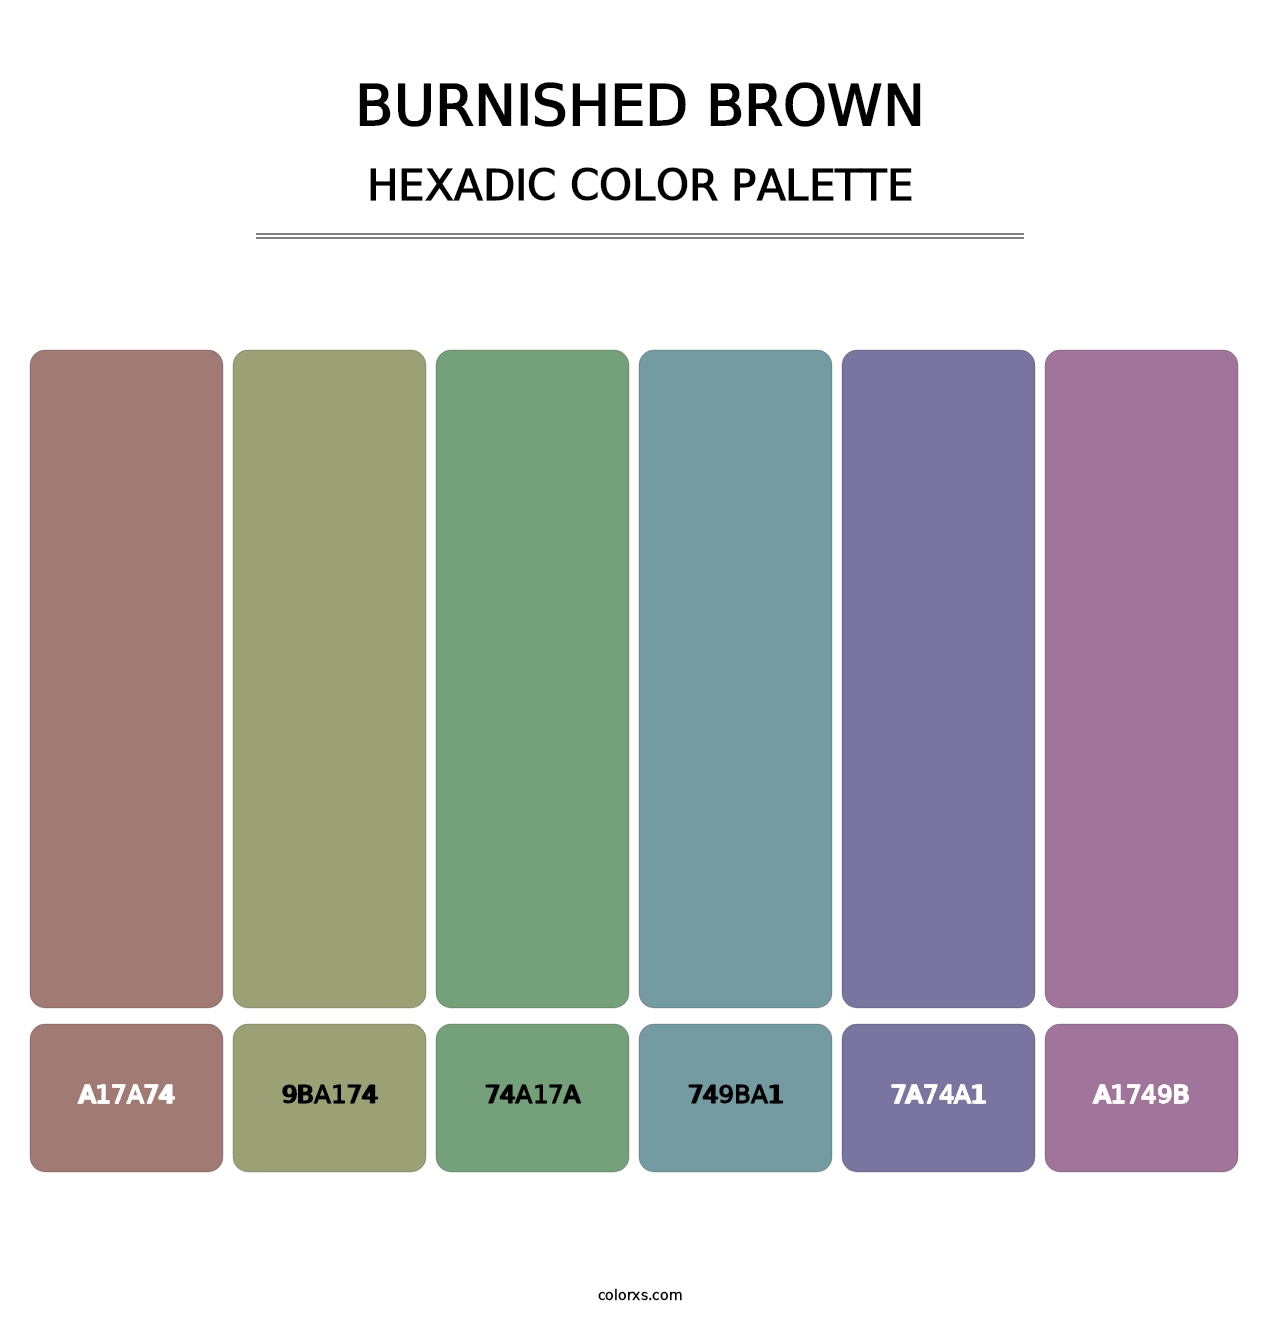 Burnished Brown - Hexadic Color Palette